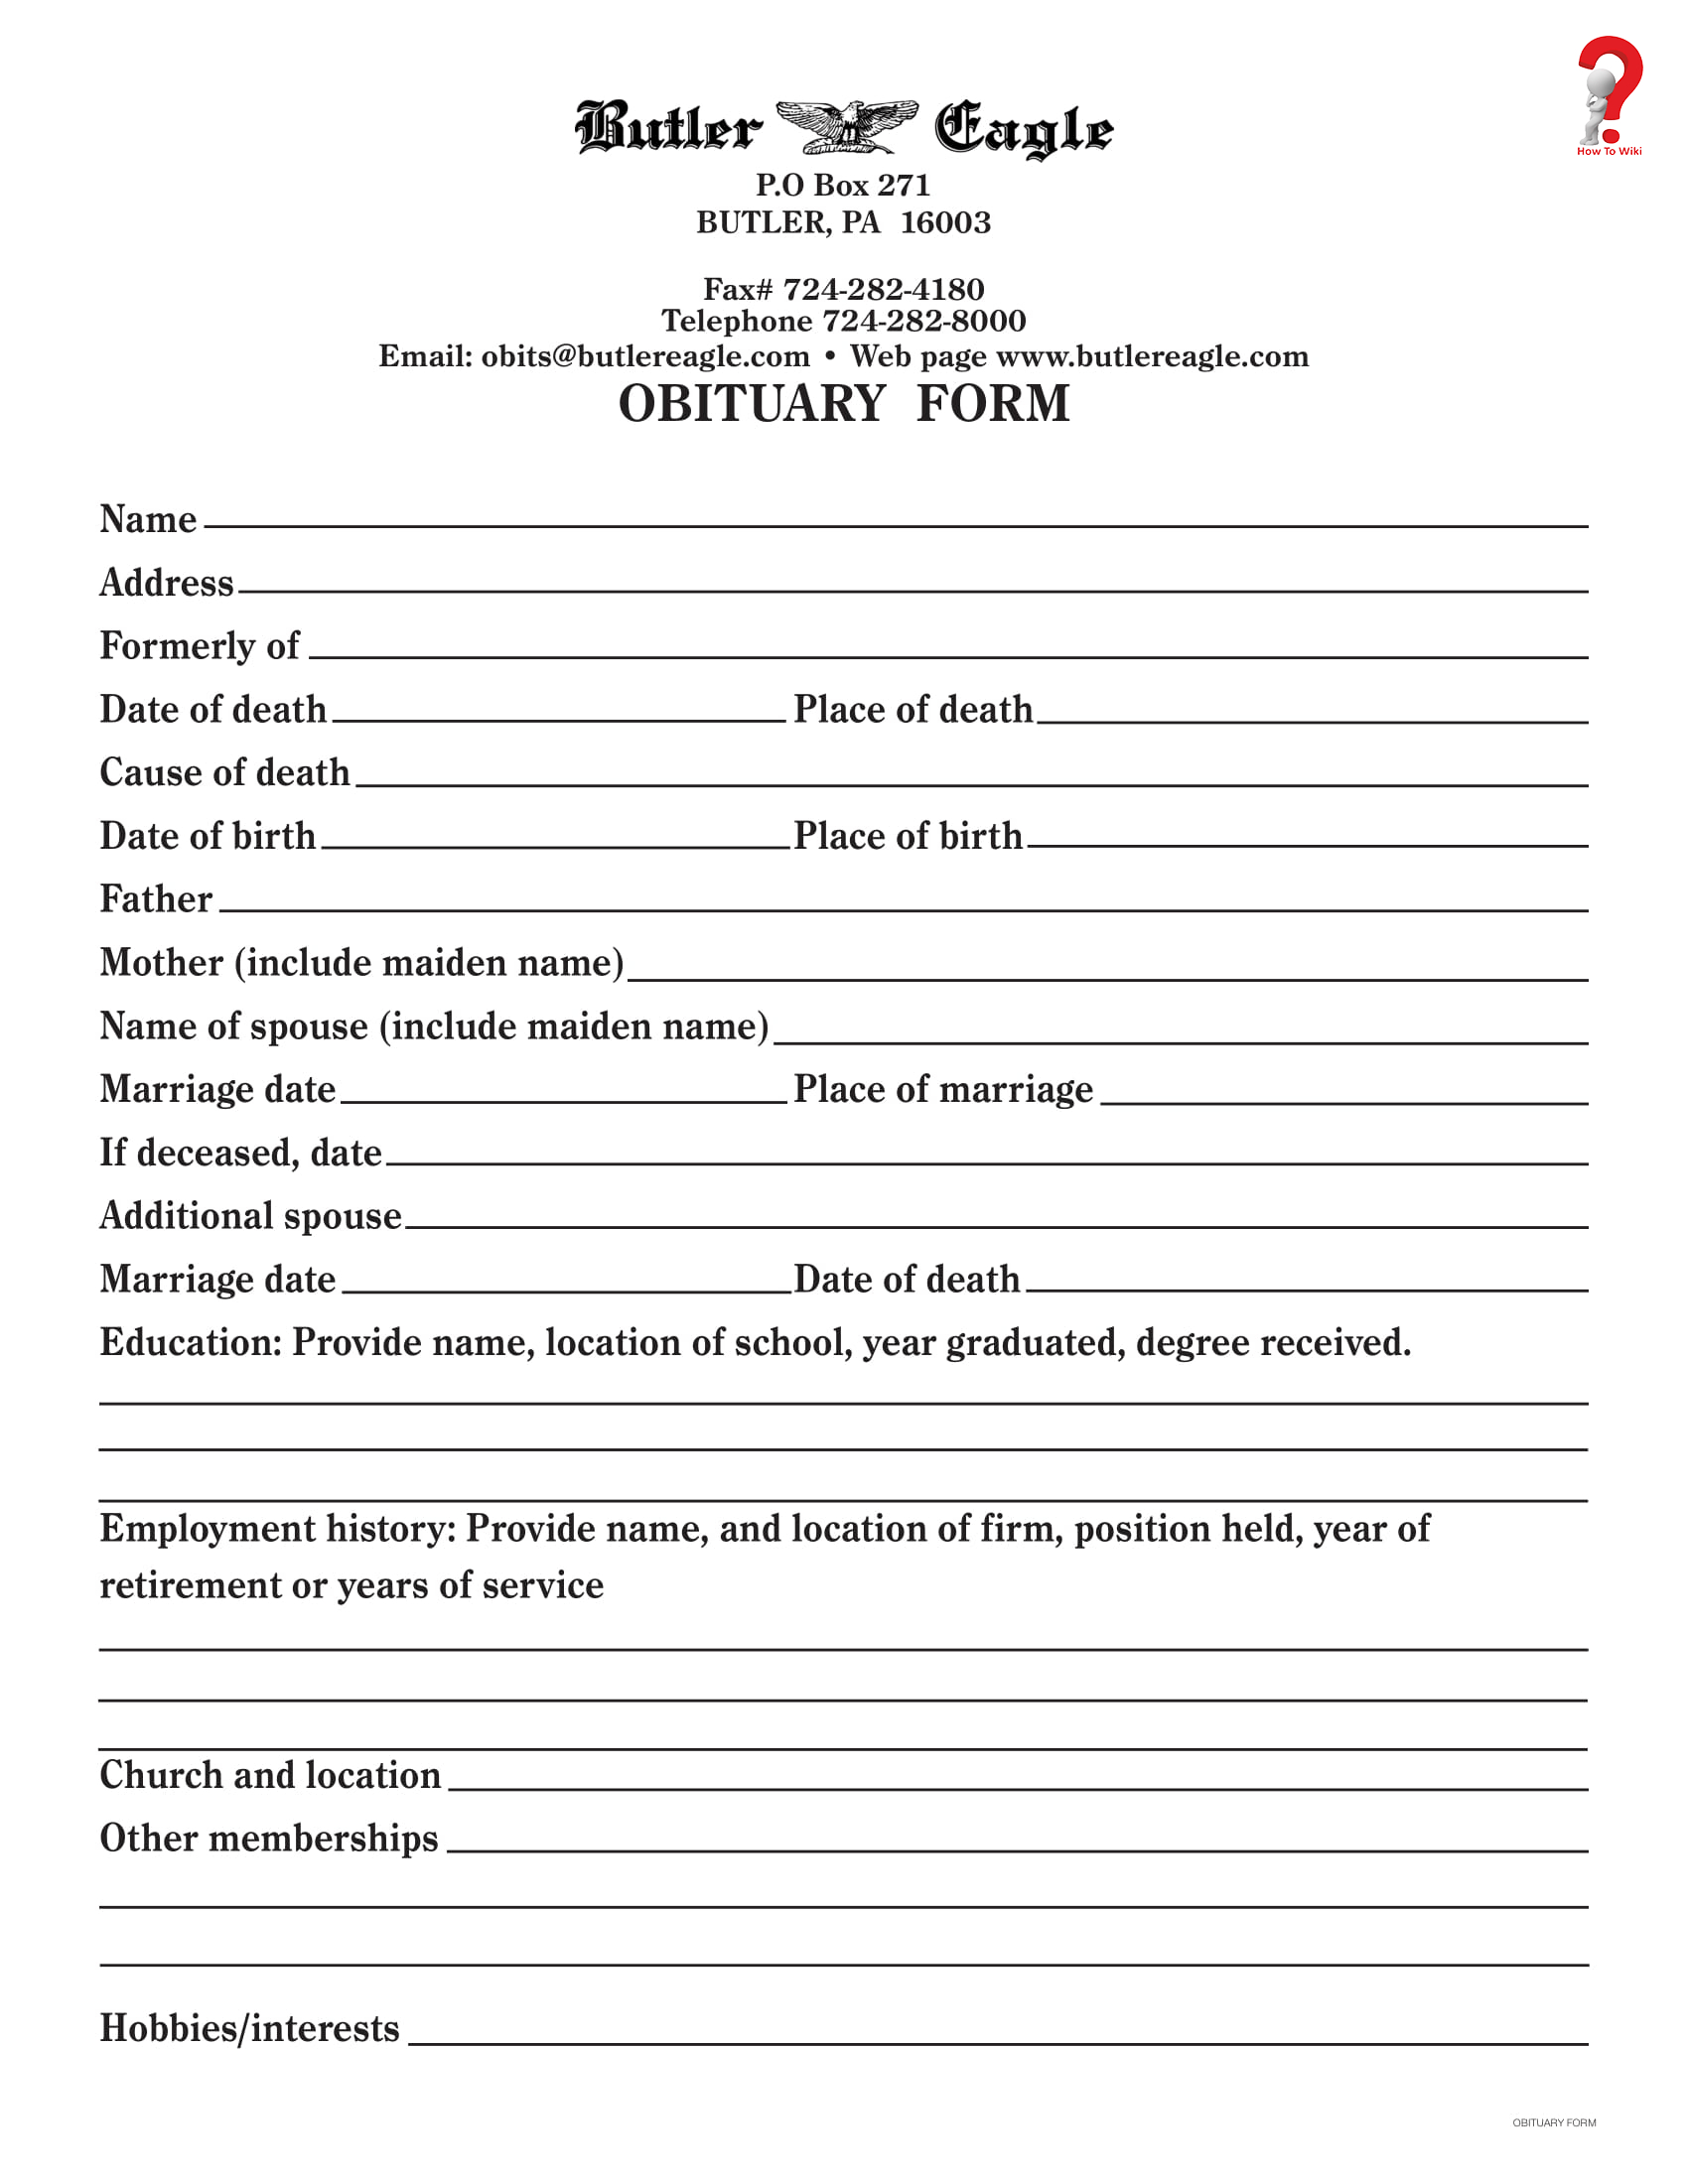 How To Write An Obituary Template In Simple Steps | How To Wiki Regarding Fill In The Blank Obituary Template